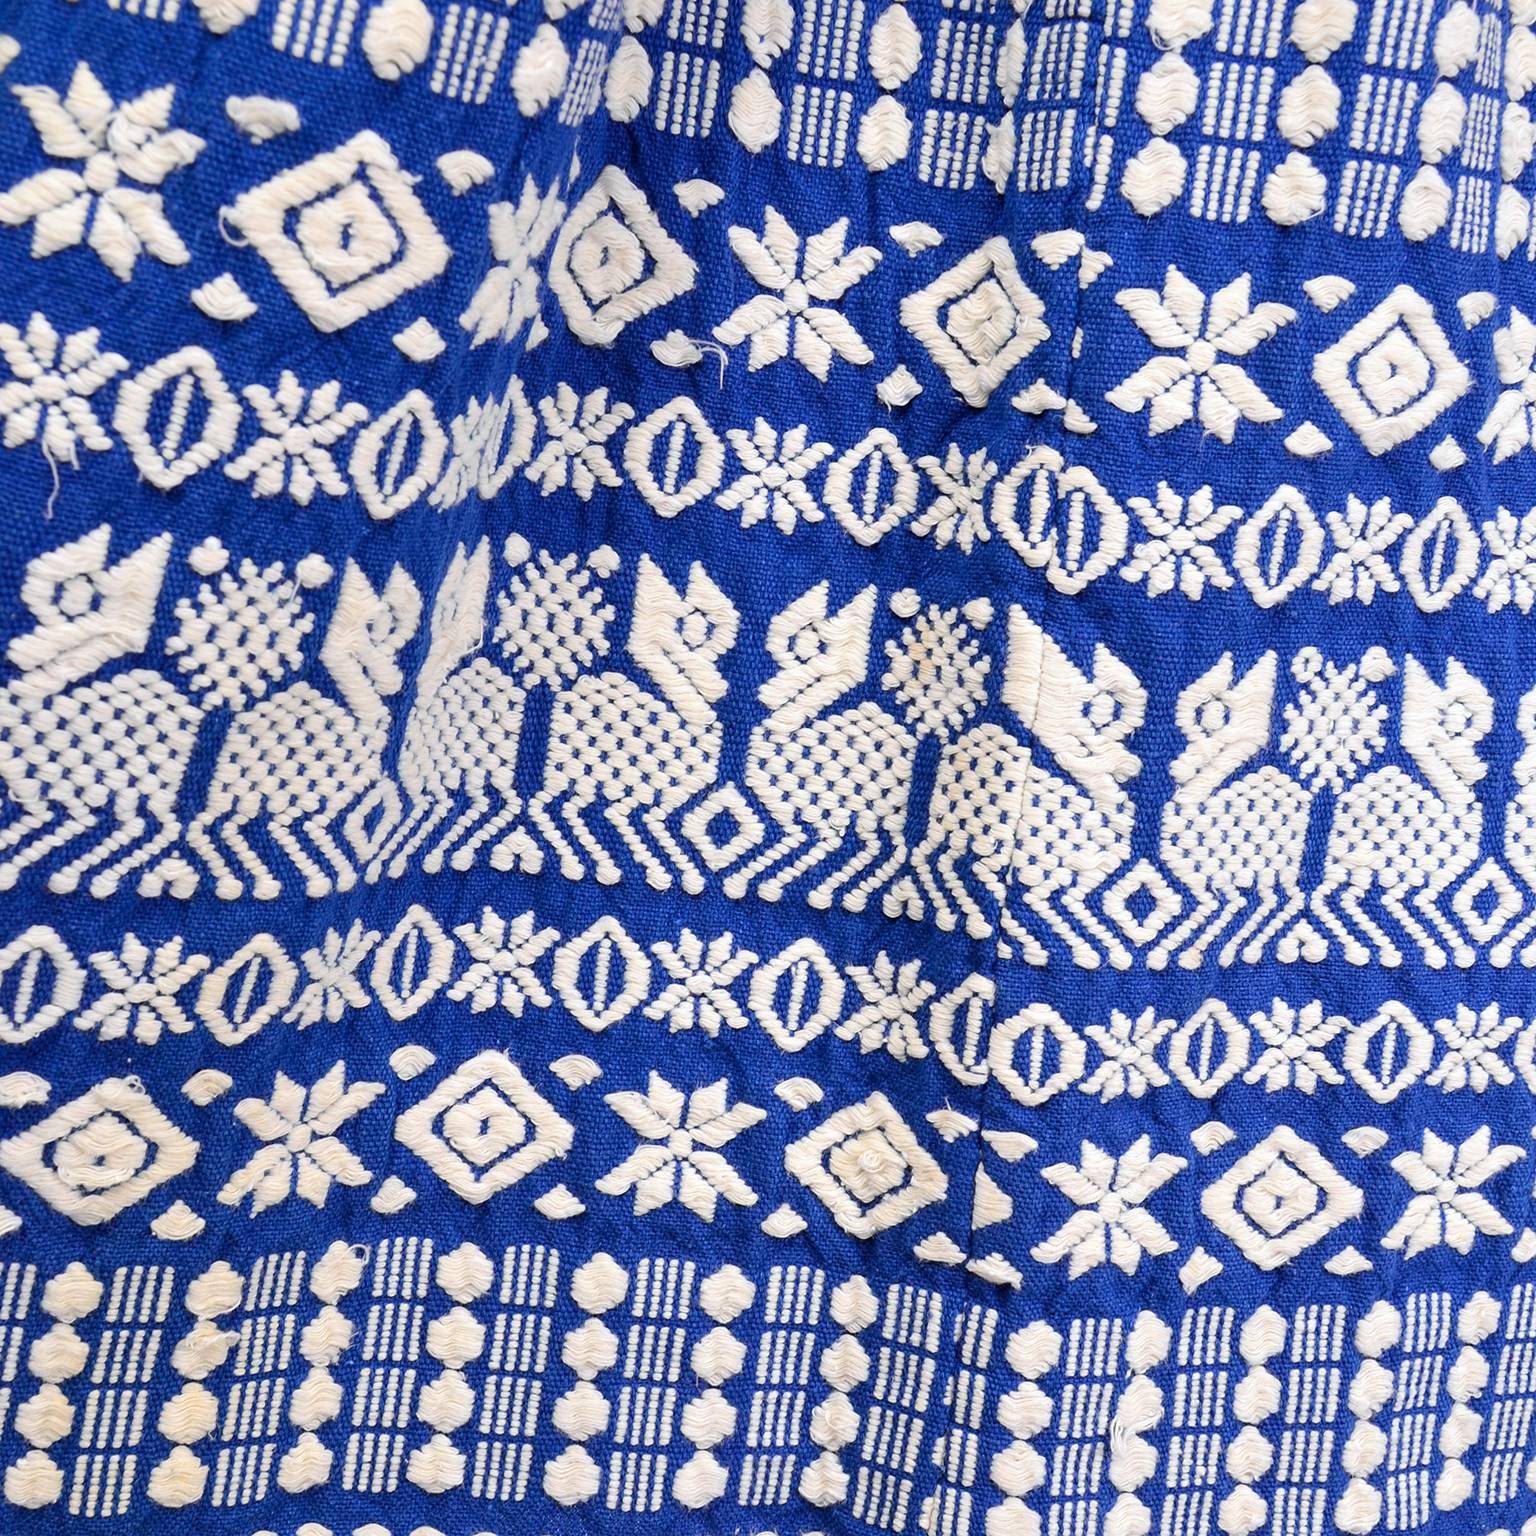 This is a wonderful vintage mid century blue Folk skirt with gorgeous white embroidery that was made in Guatemala.  We acquired this from one of an incredible estate that included outstanding hand embroidered clothing and accessories. The quality of